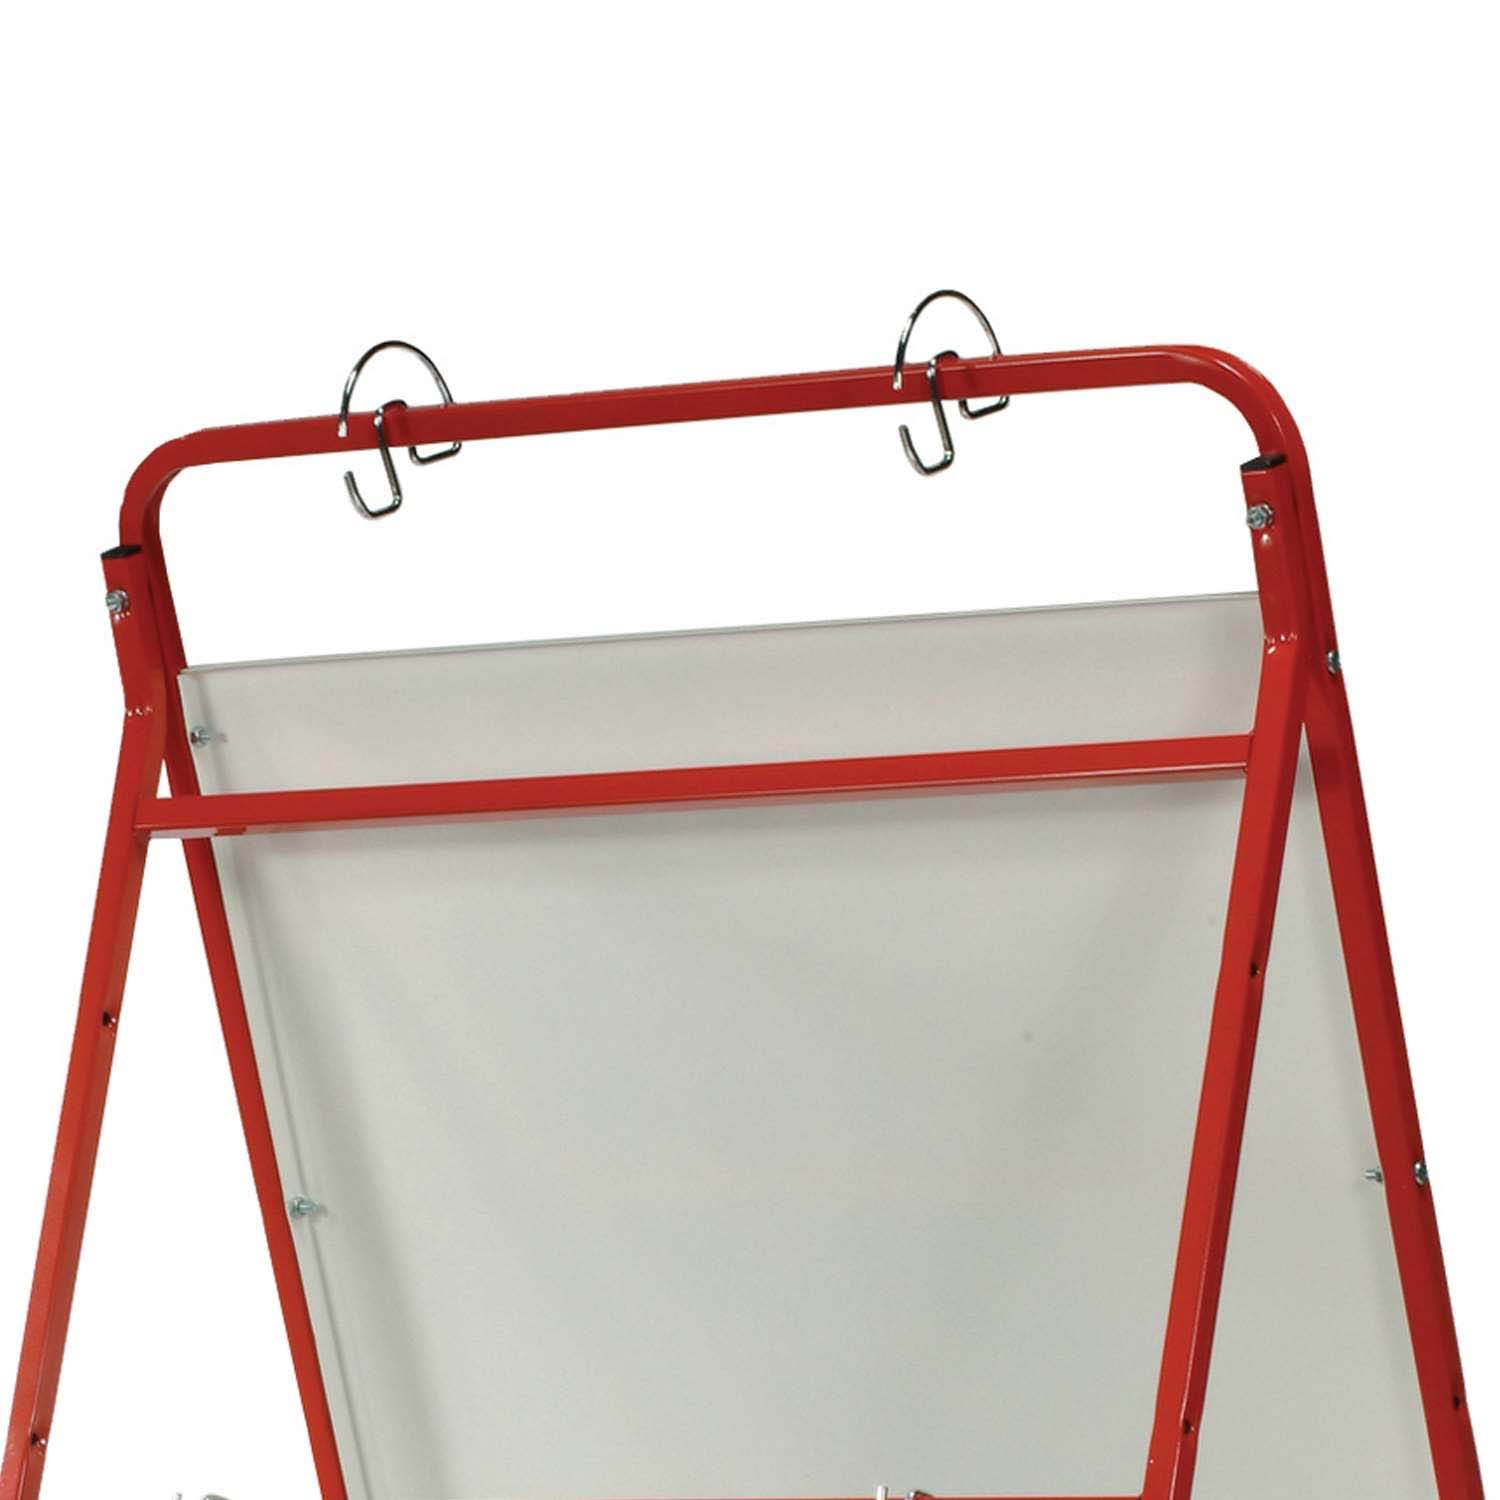 Easels for Teachers, Classroom Easels